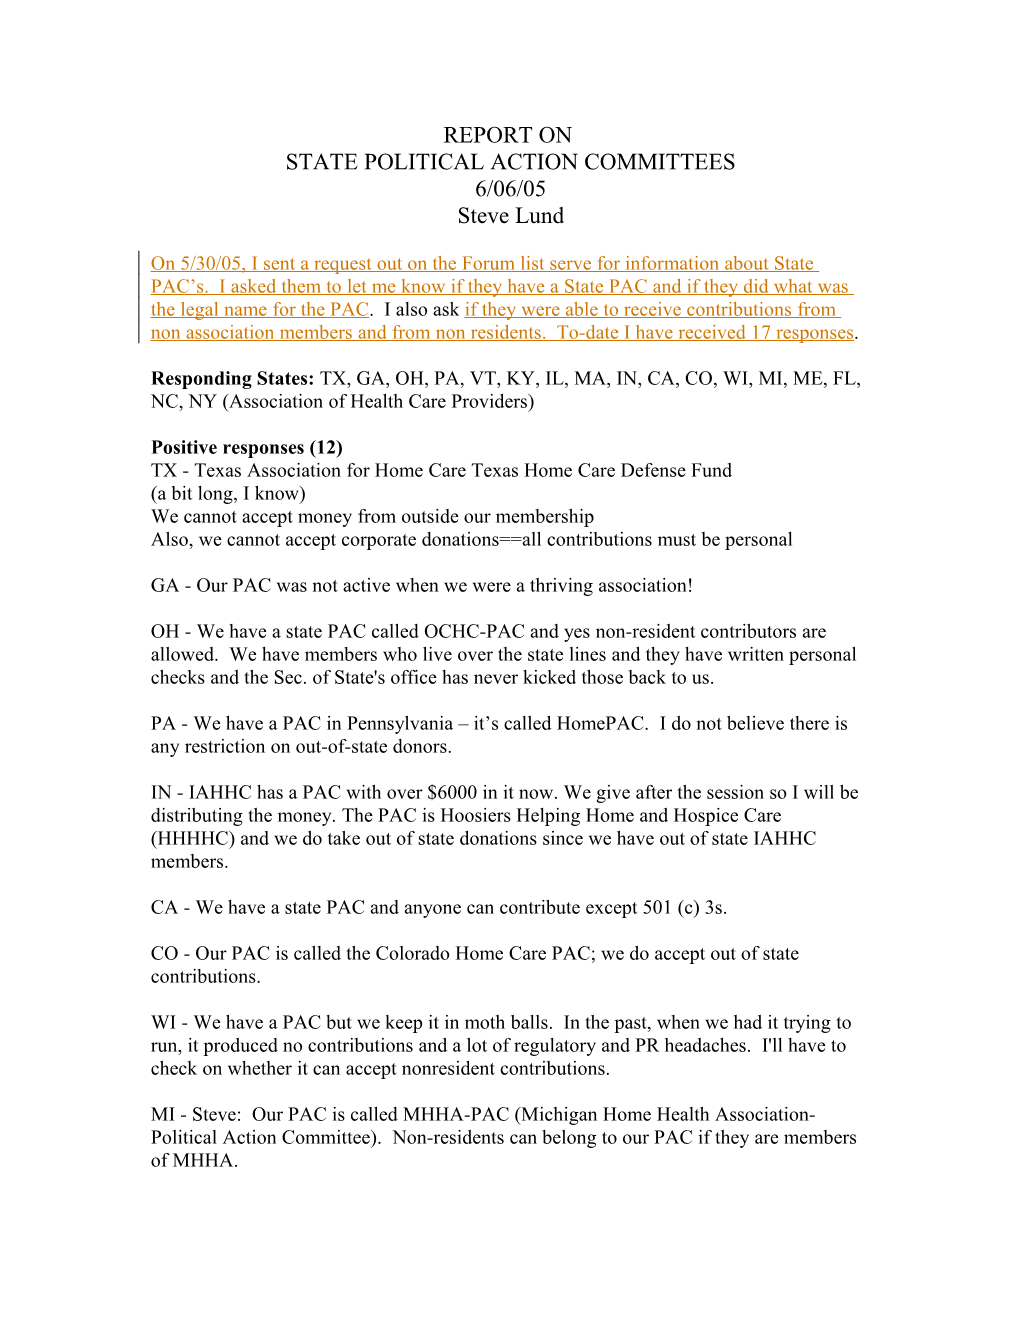 STATE Political Action Committees